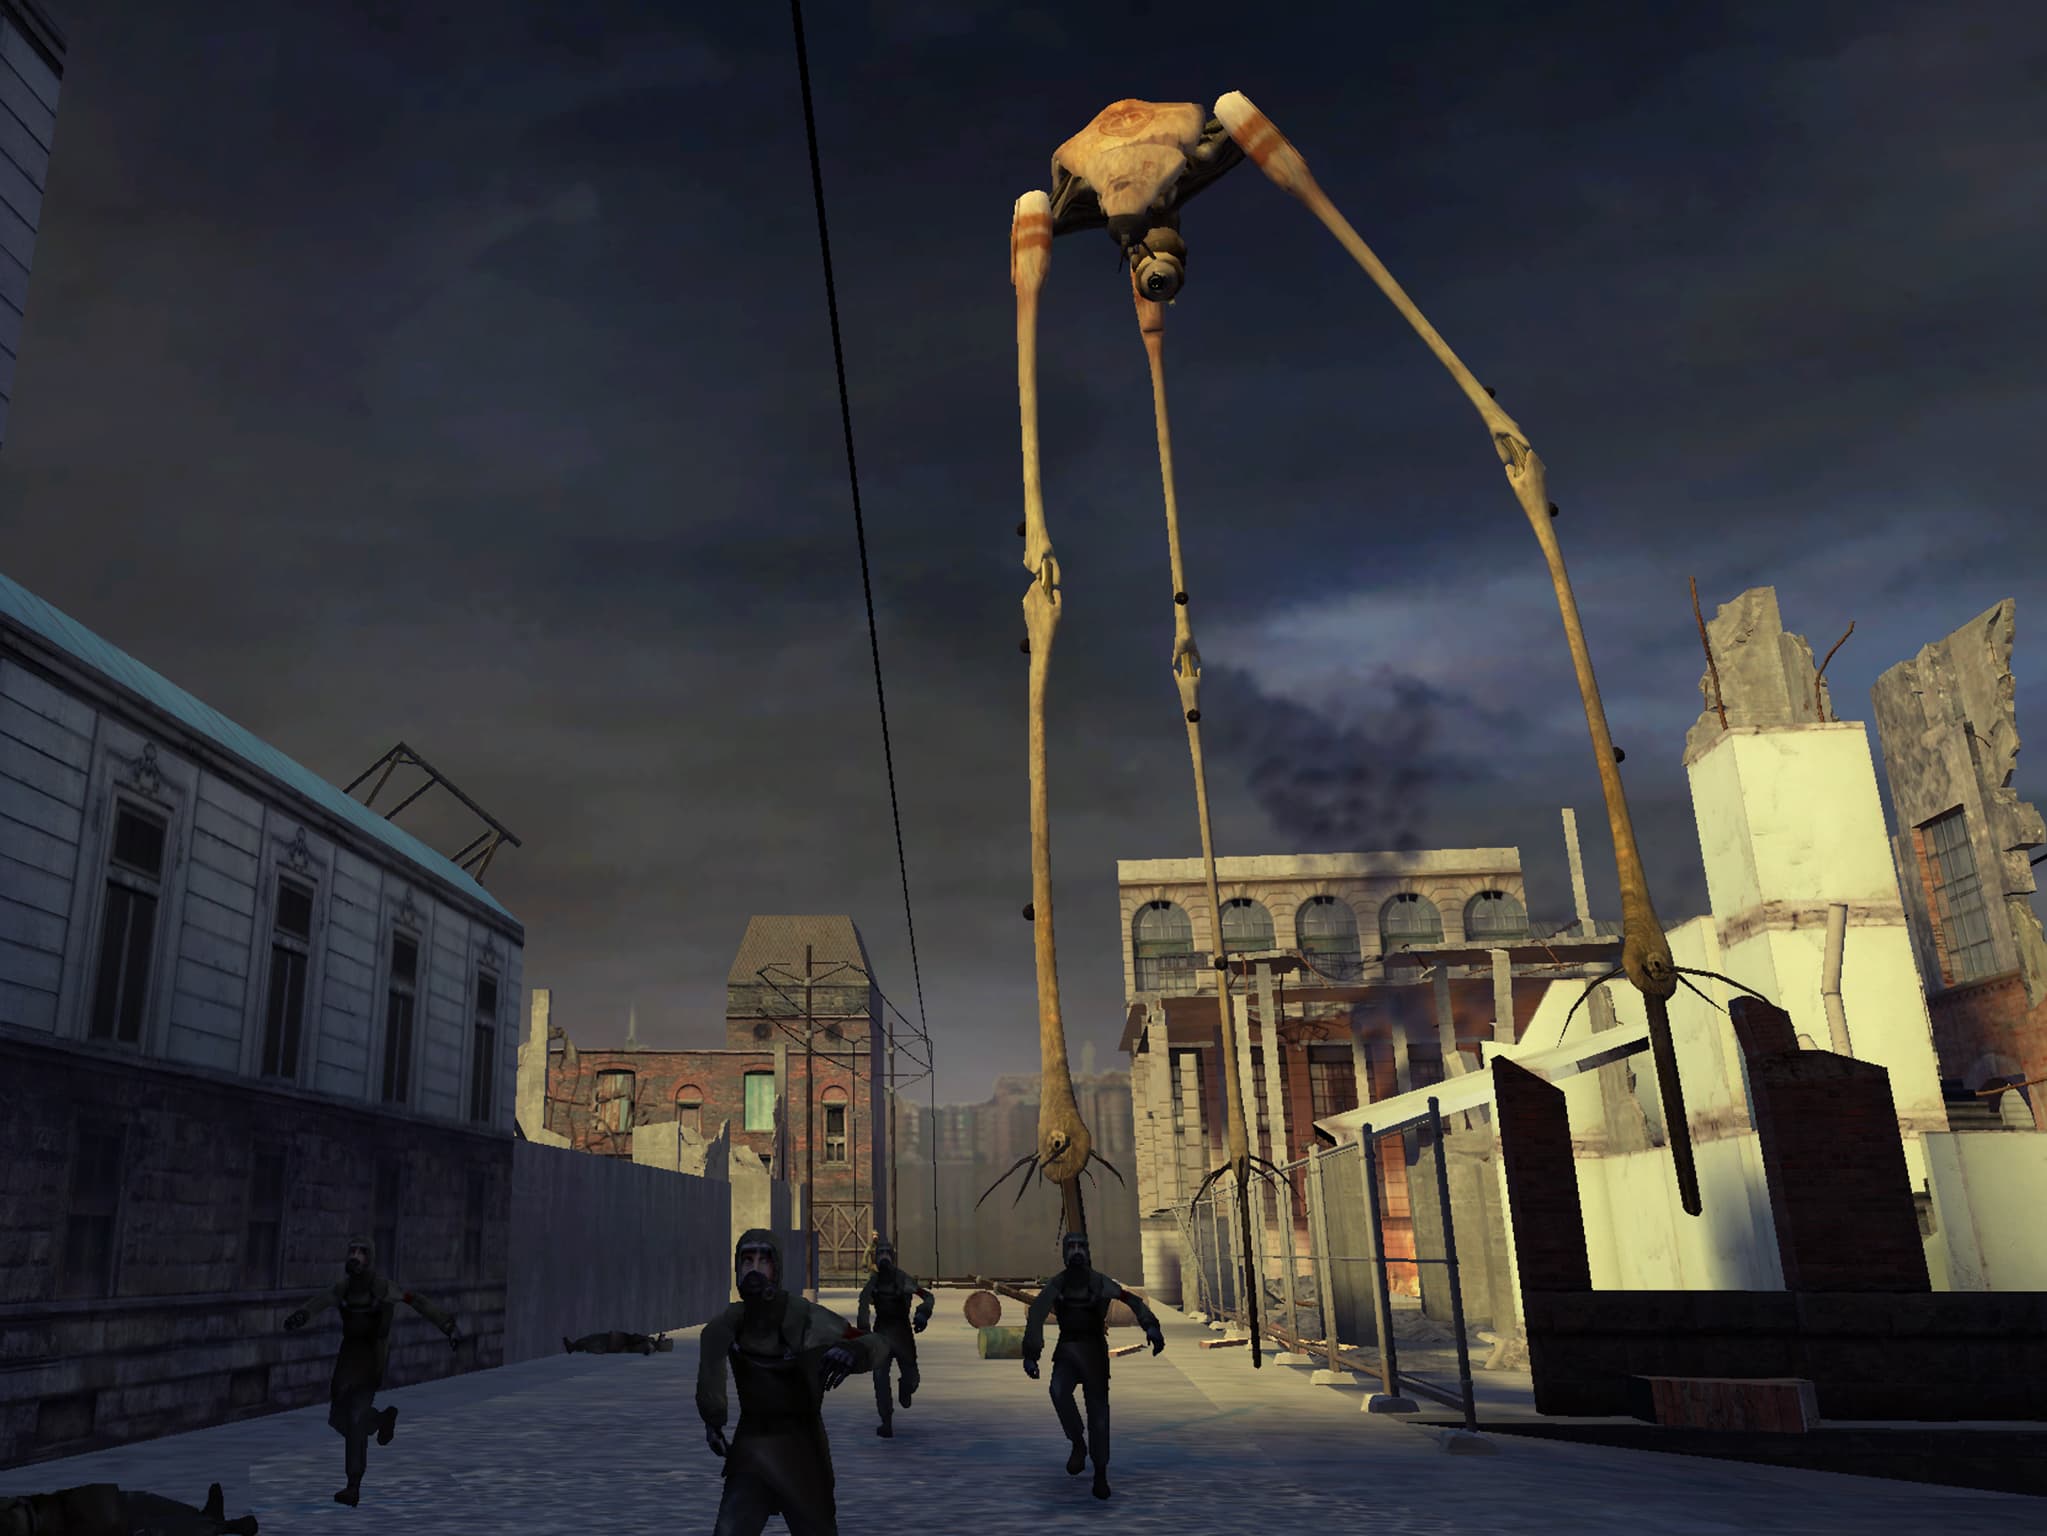 A massive tripod, the Combine Strider, chases after men wearing overalls and gas masks in the middle of a city block with dilapidated, war-torn buildings.